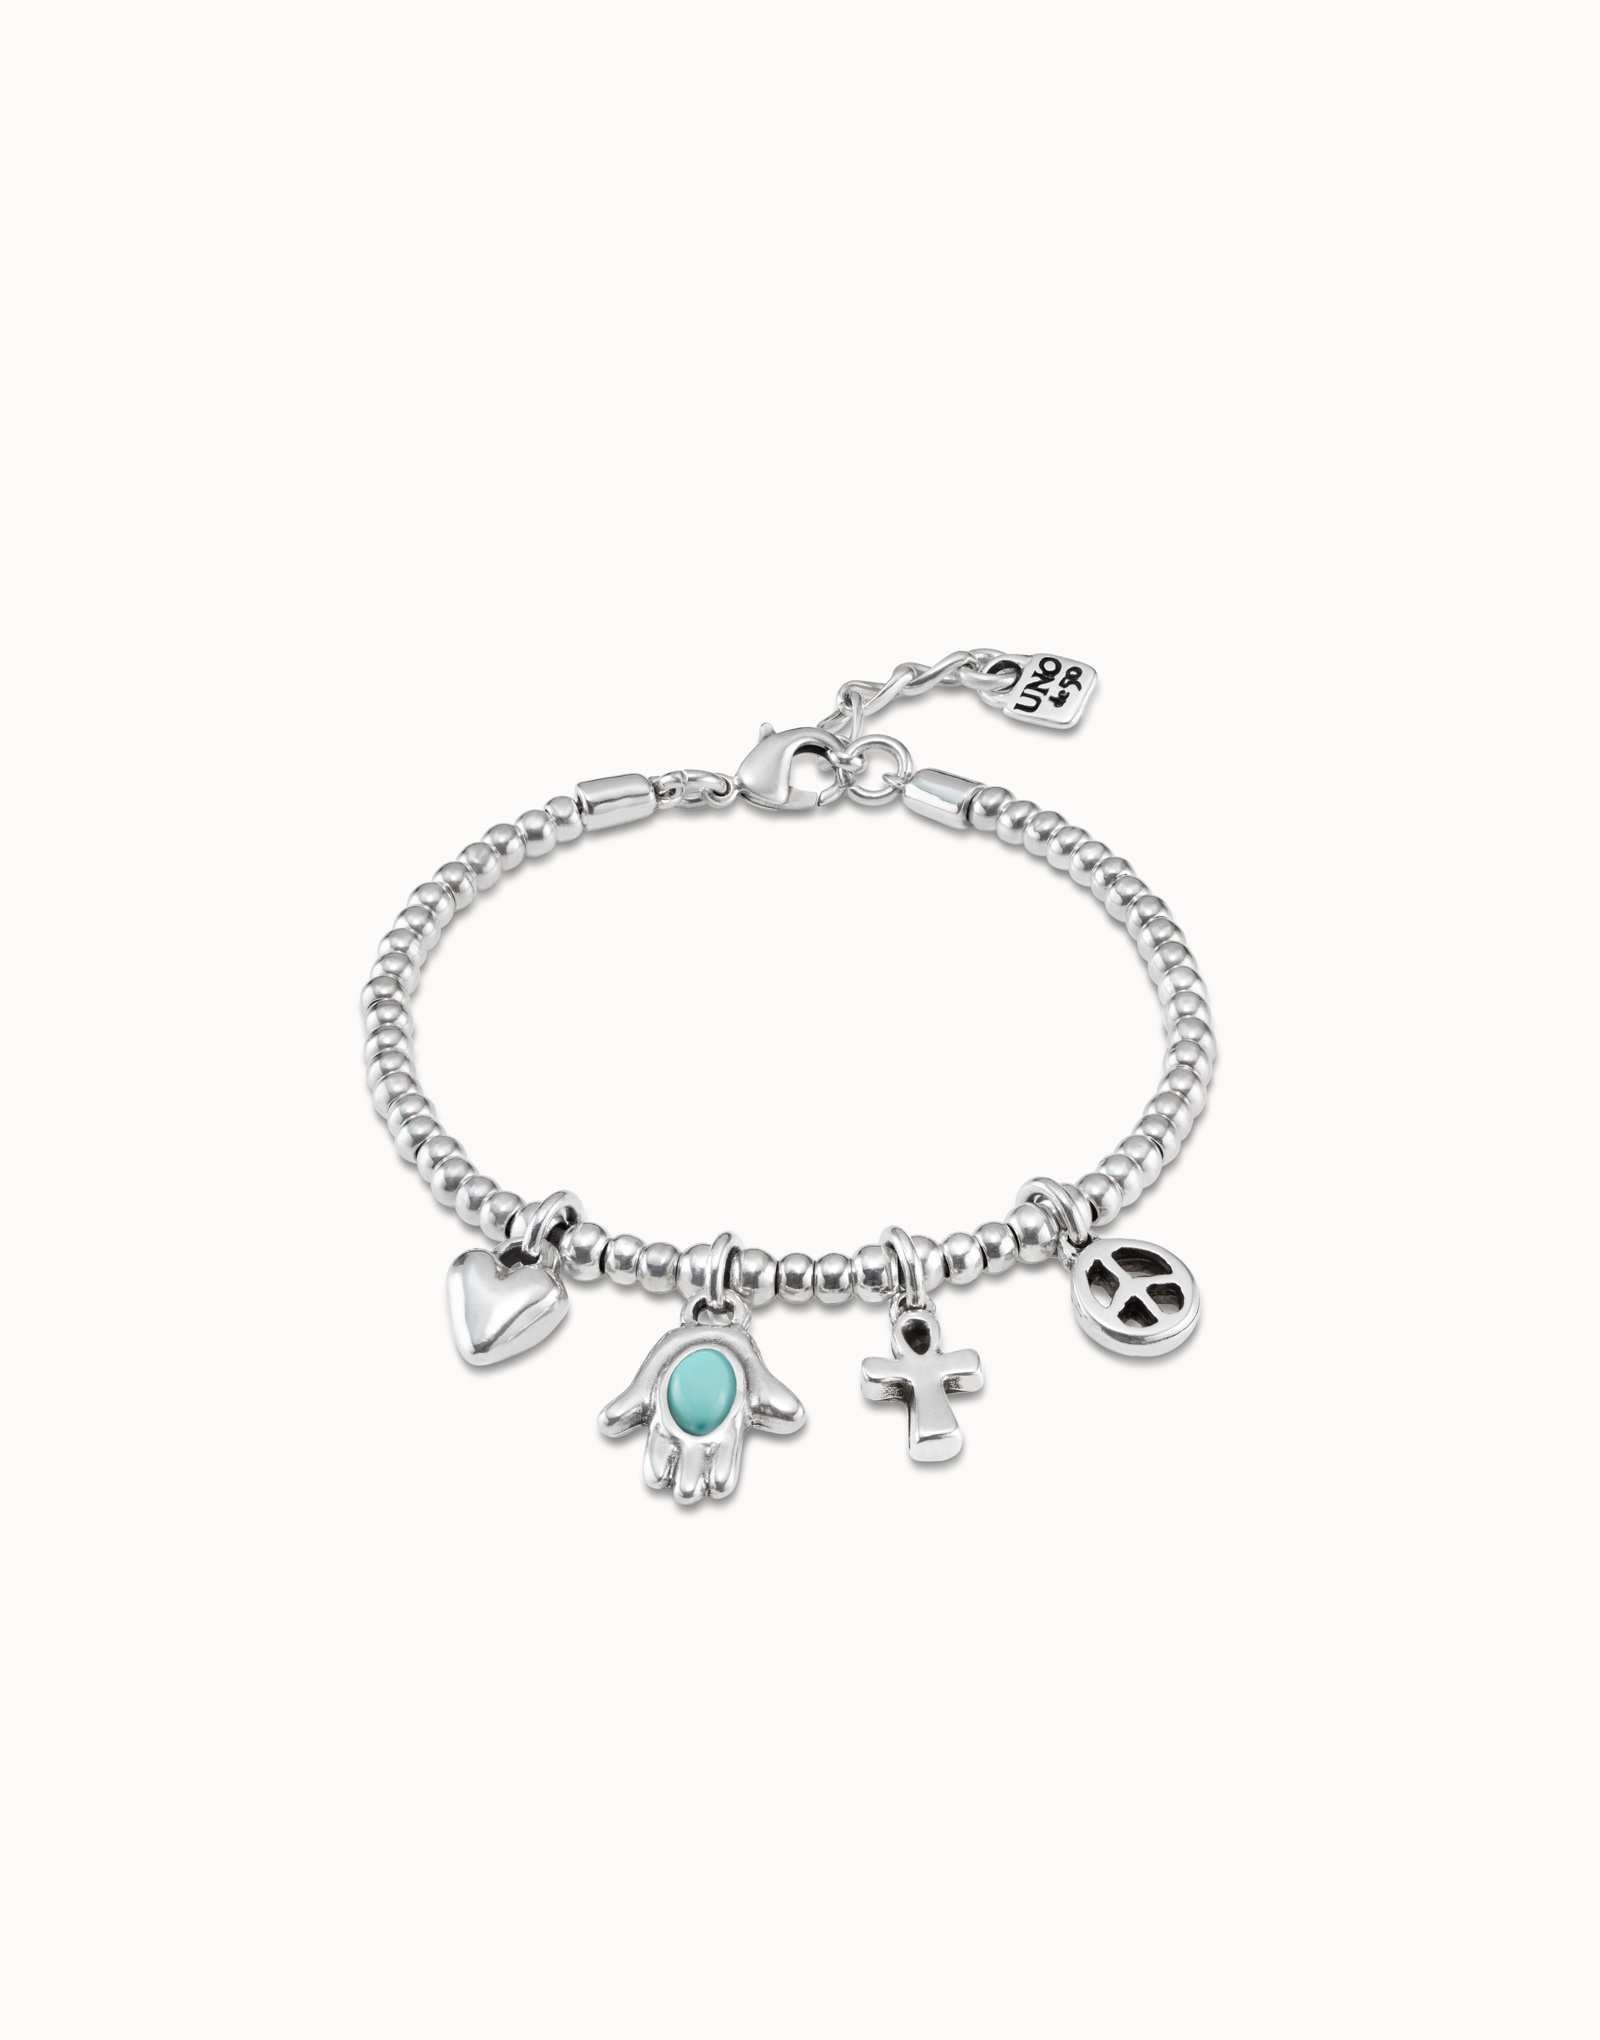 Sterling silver-plated bracelet with bead chain, 4 charms and carabiner clasp, , large image number null